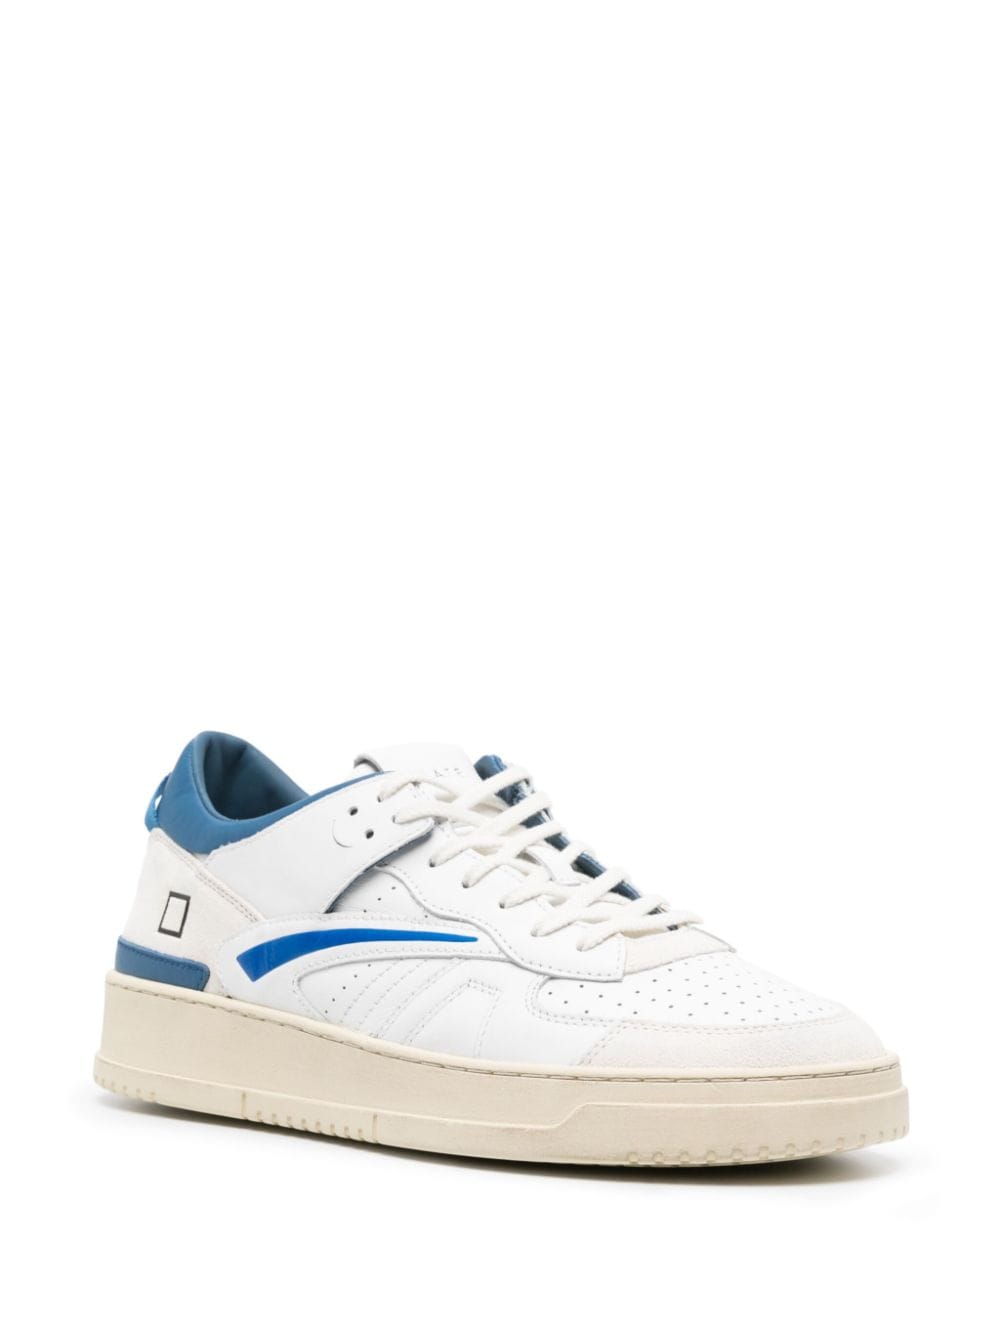 Shop Date Torneo Leather Sneakers In White